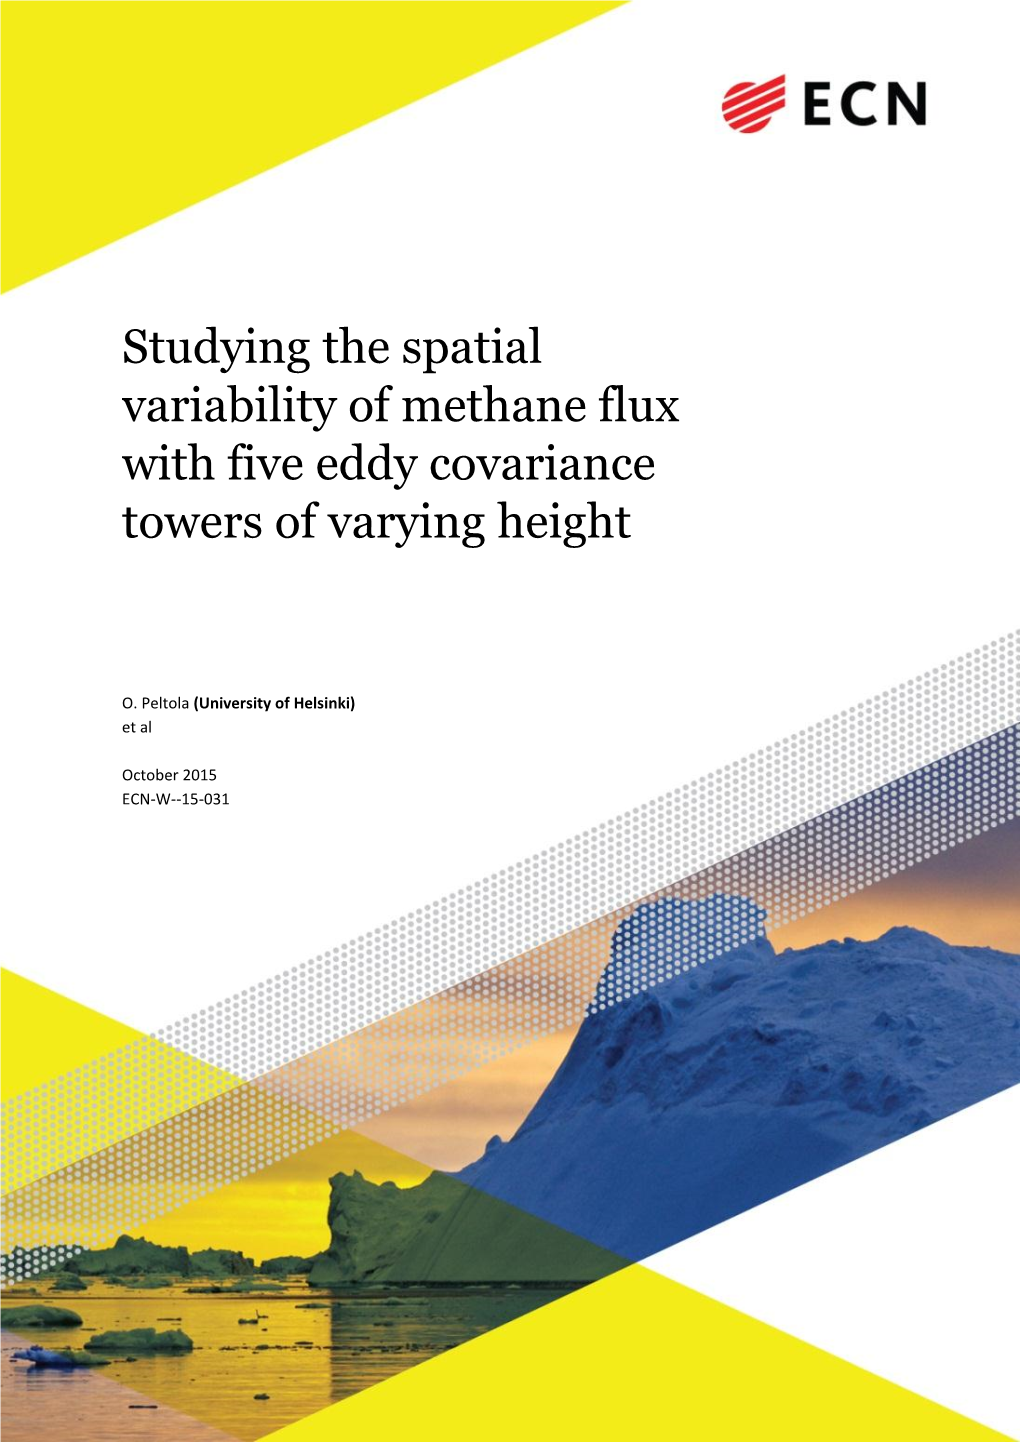 Studying the Spatial Variability of Methane Flux with Five Eddy Covariance Towers of Varying Height